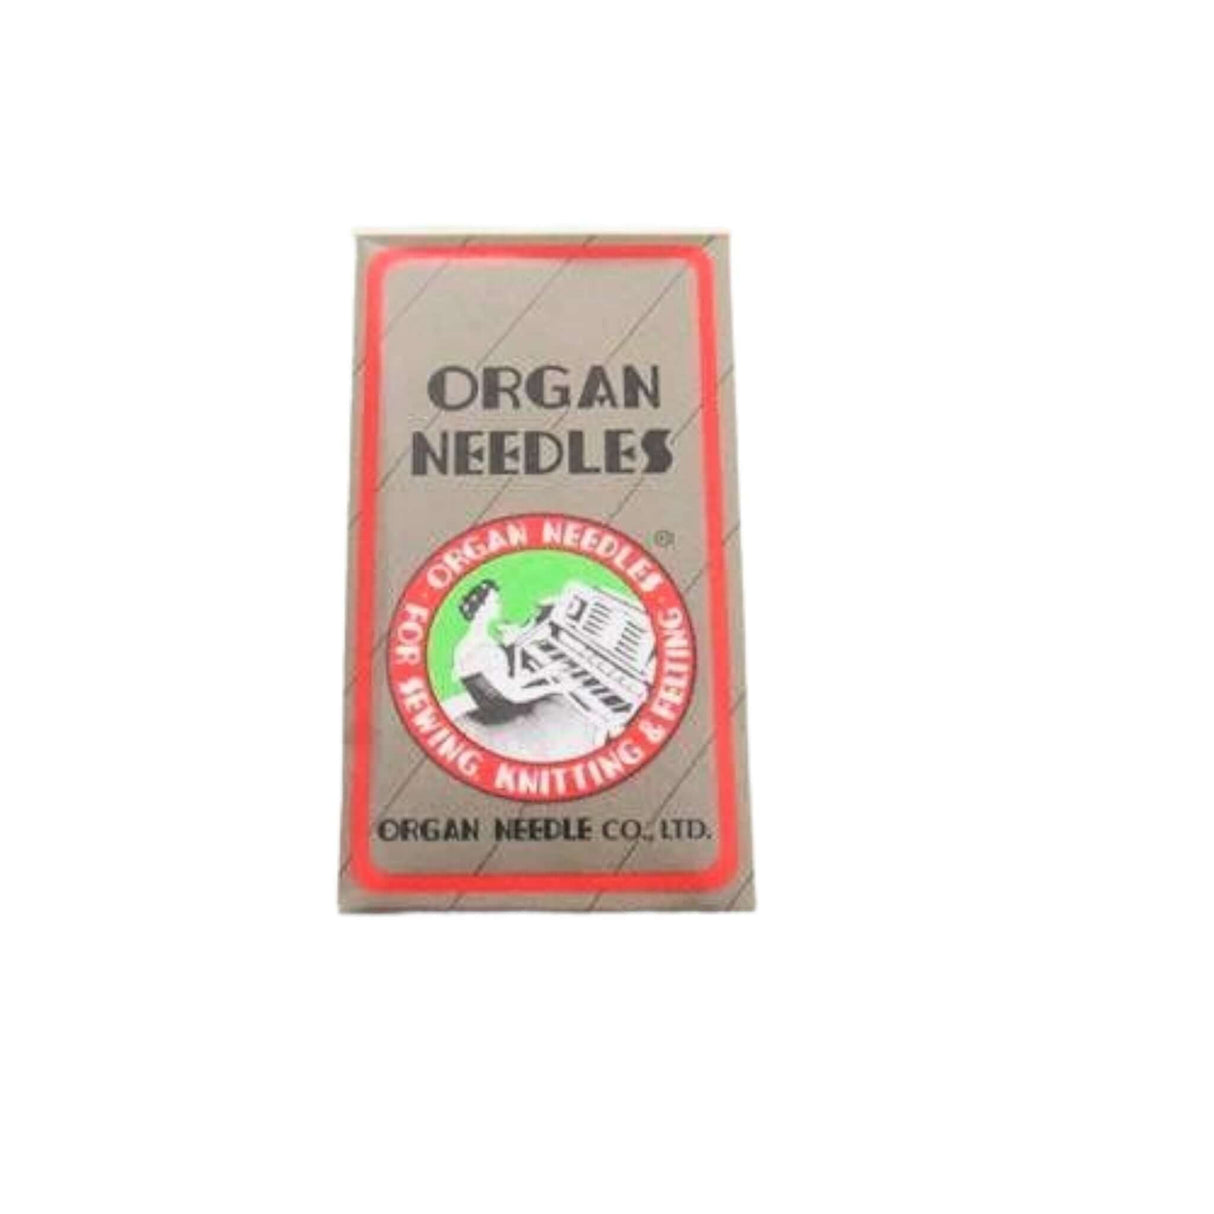 Organ Needles Sharp Point- 15X1 Available in size 9, 11, 12, 14, 16, 18, 20 - Central Michigan Sewing Supplies